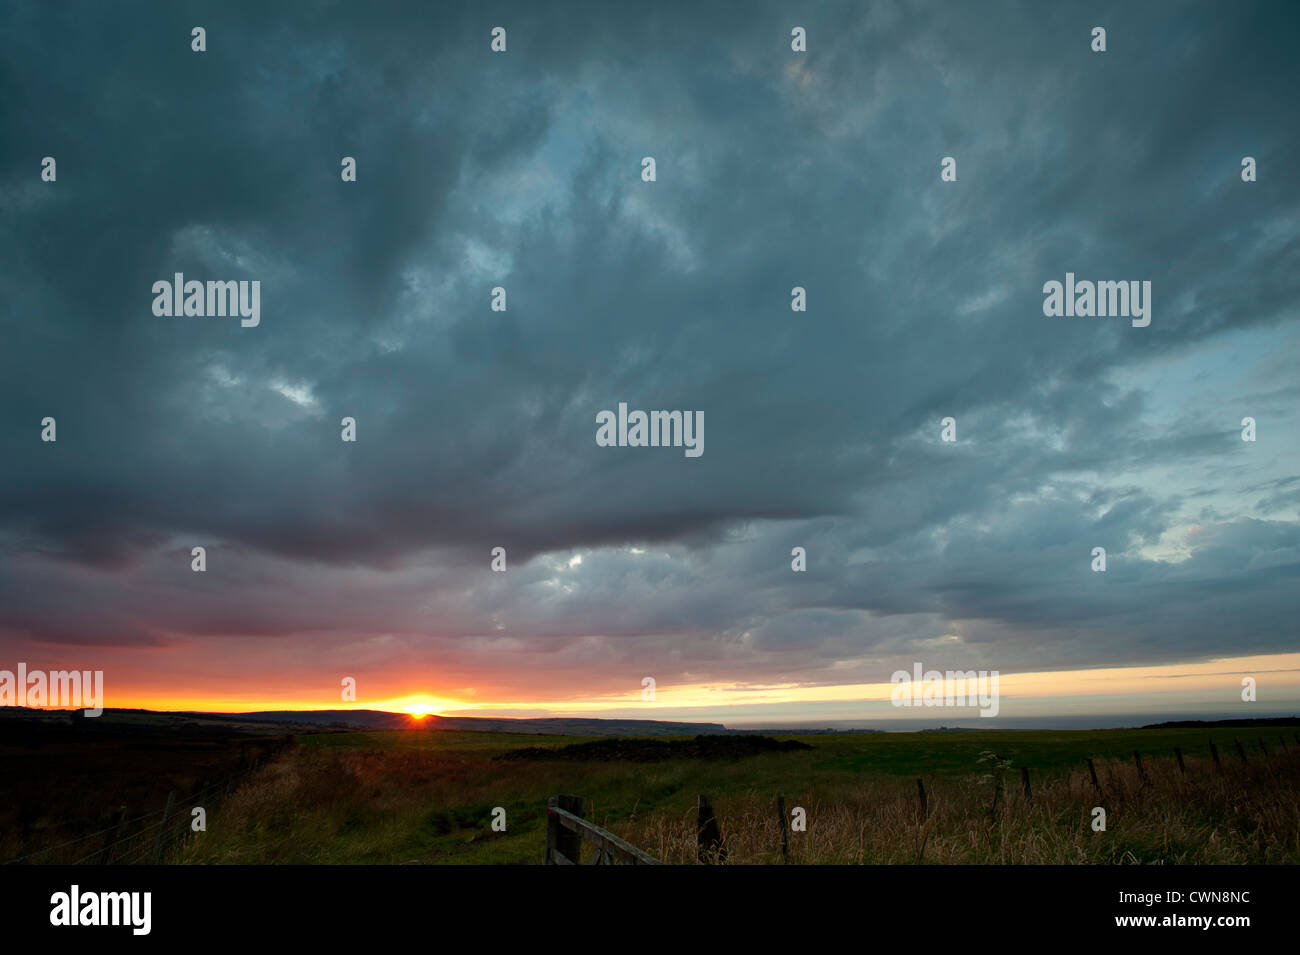 Sunset and dramatic sky over rural landscape near Whitby, North Yorkshire, United Kingdom Stock Photo